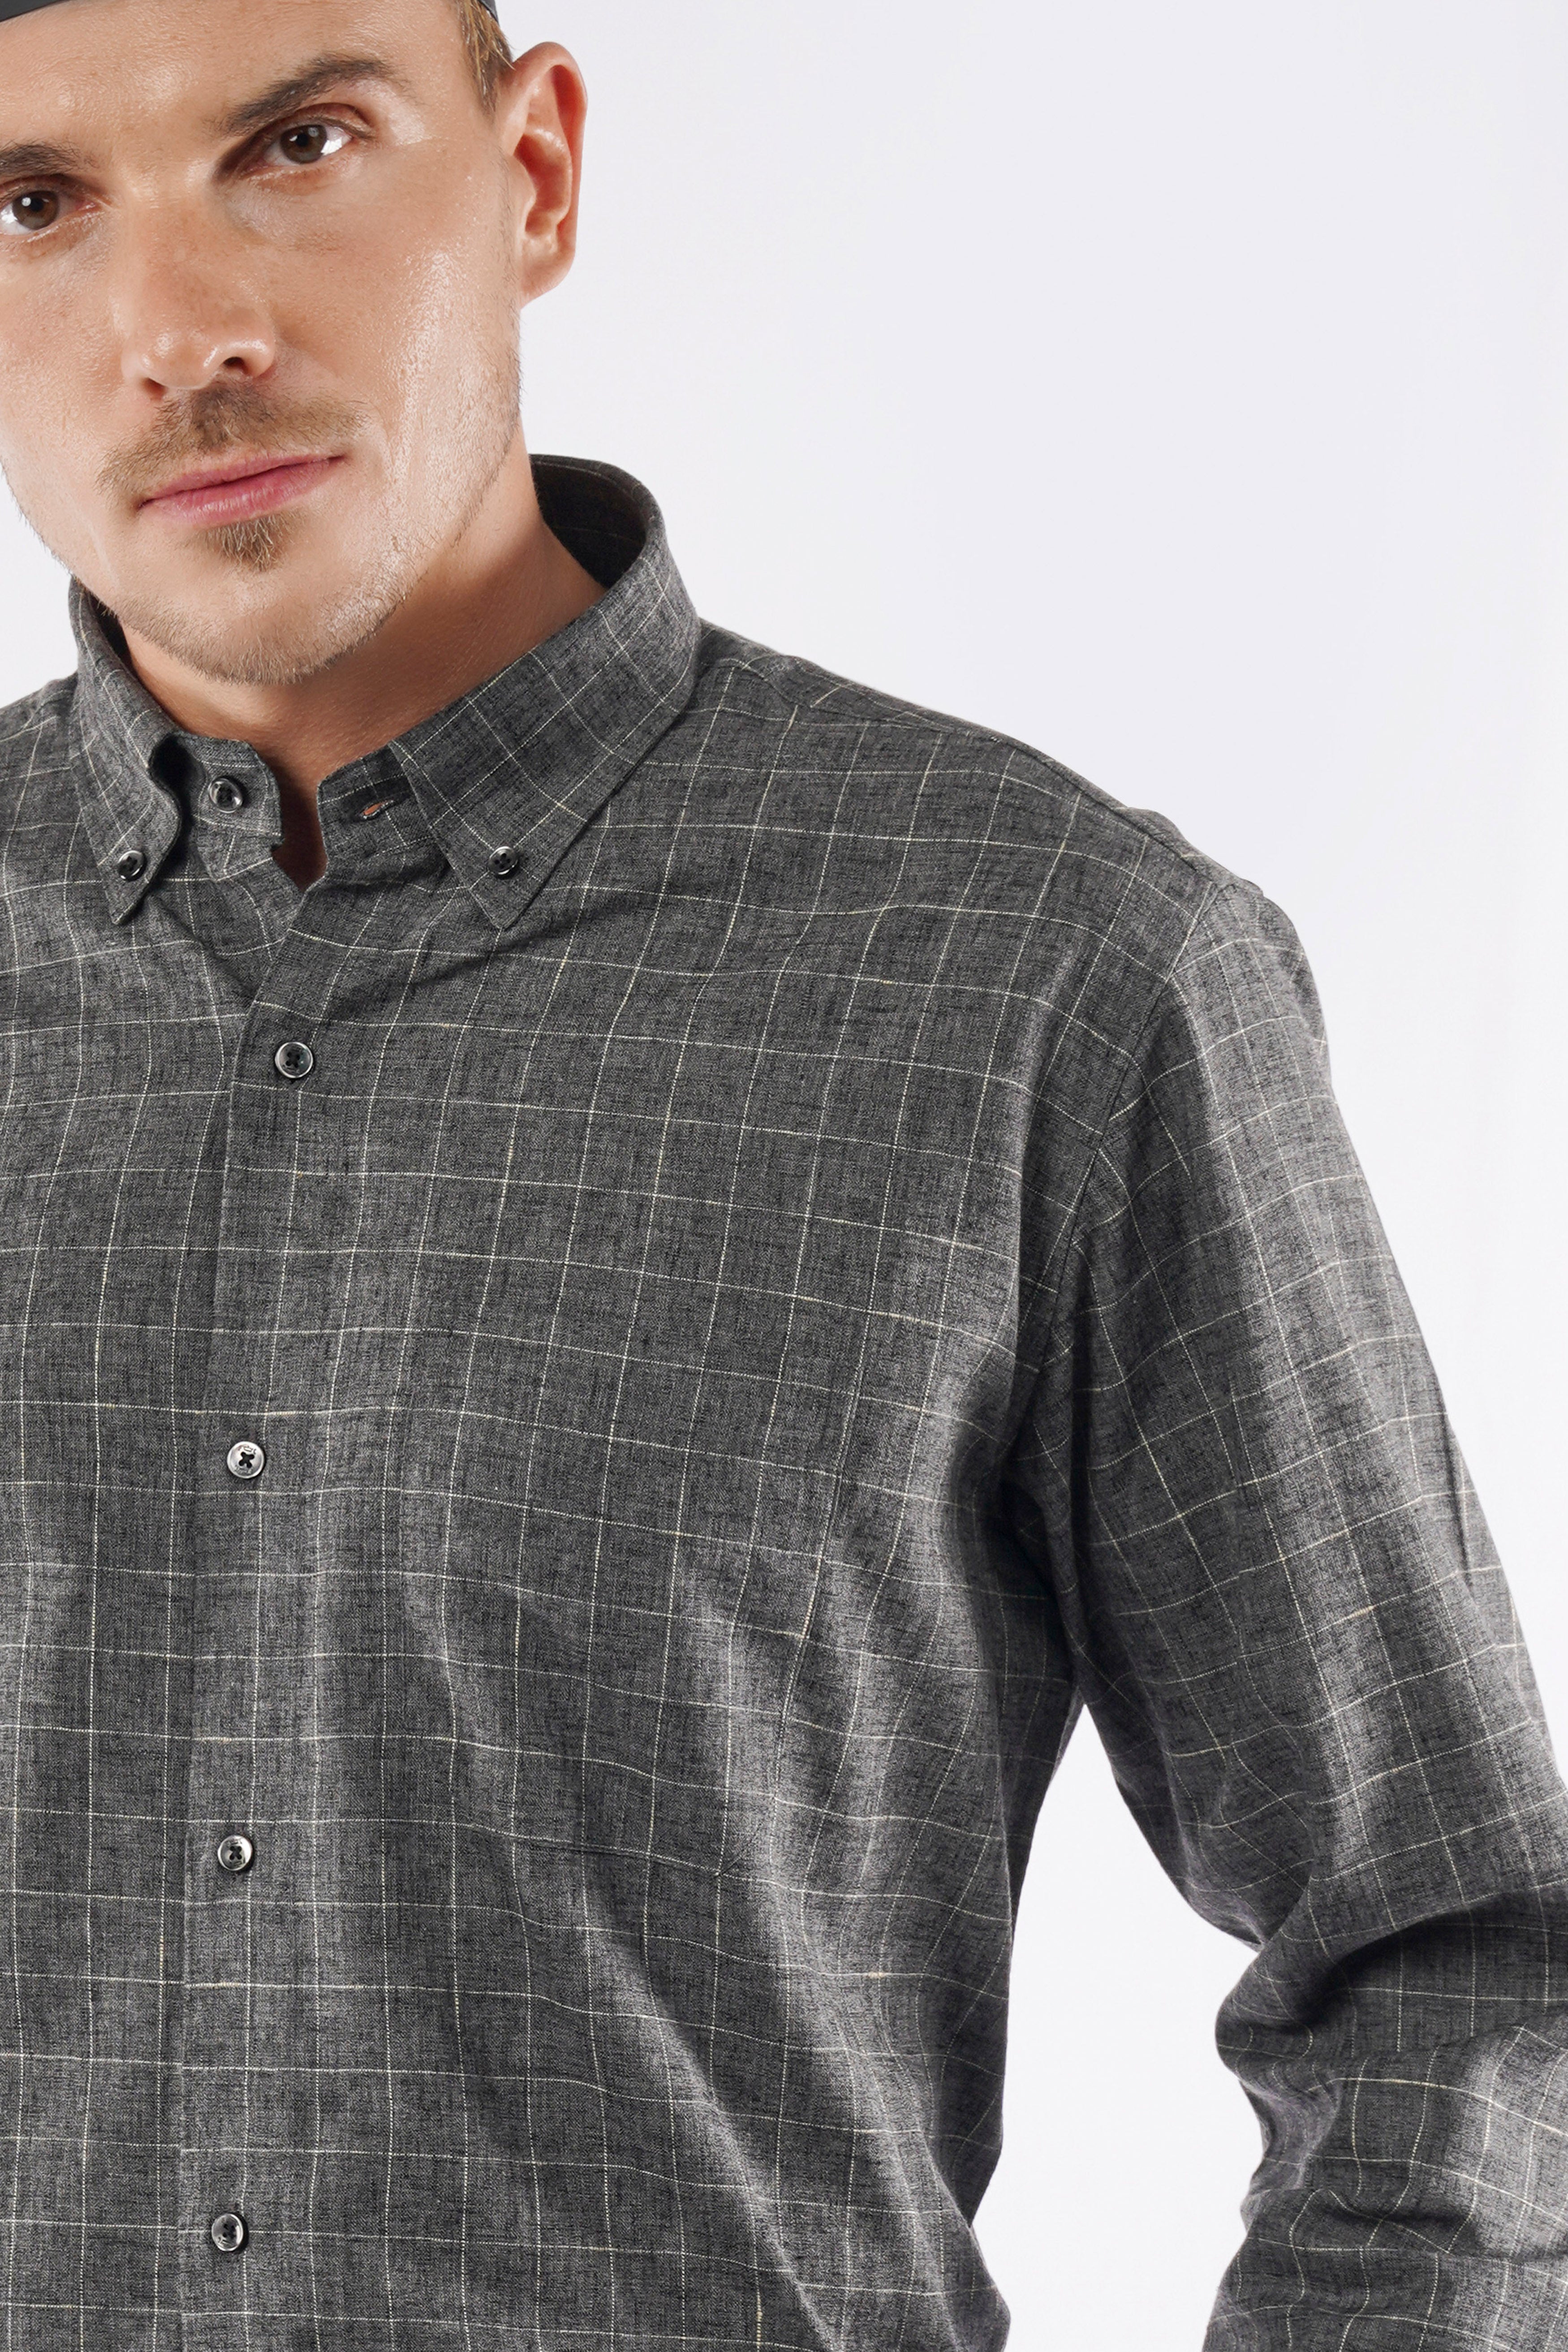 Ironside Gray and White Checkered Luxurious Linen Button-Down Shirt